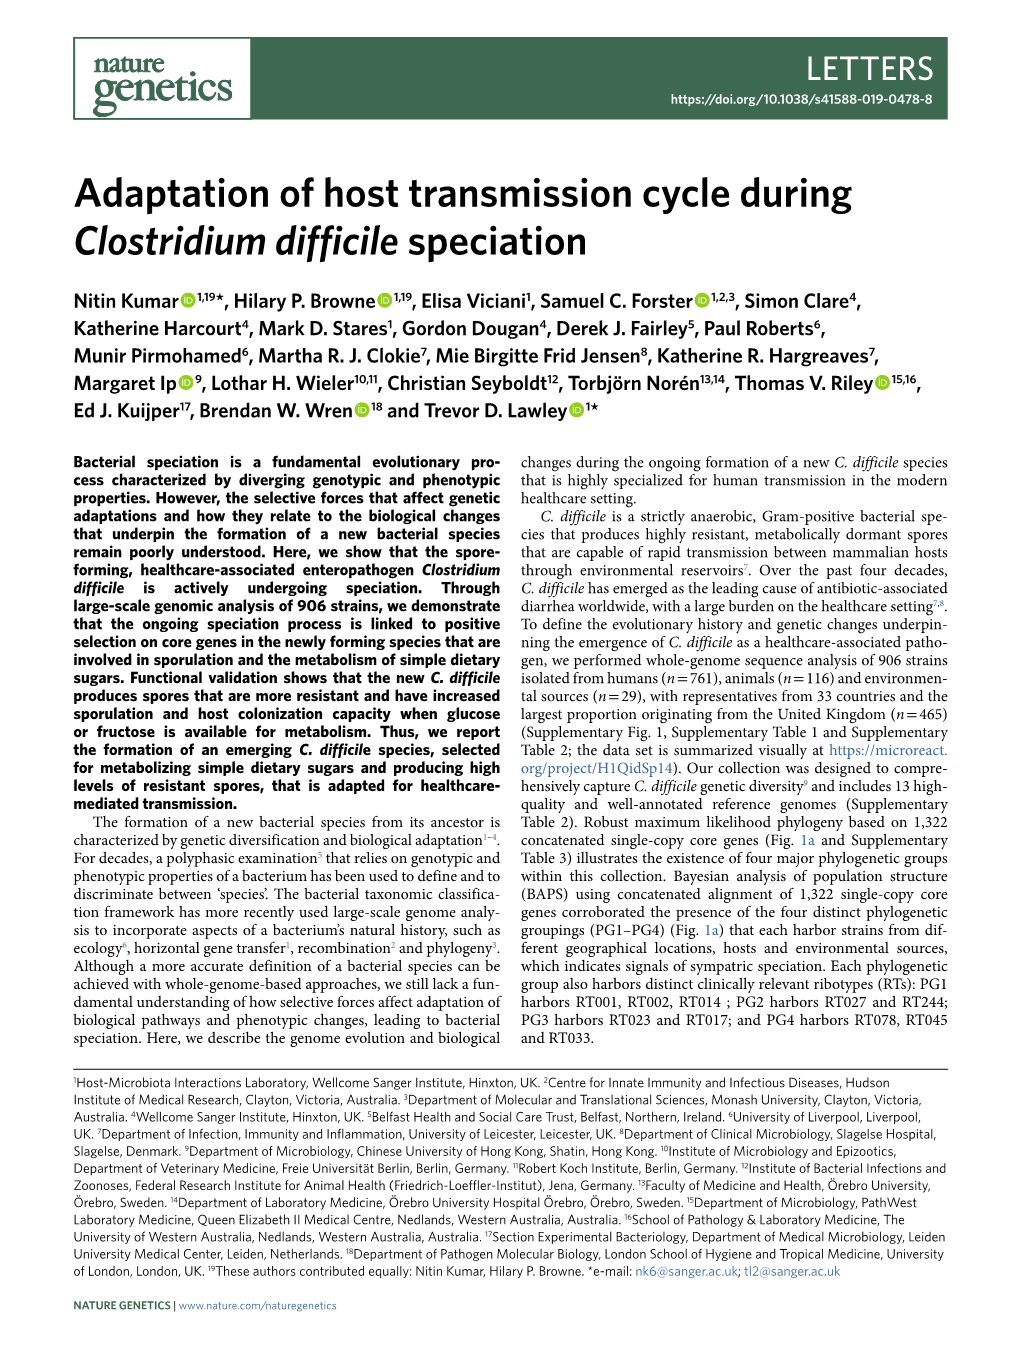 Adaptation of Host Transmission Cycle During Clostridium Difficile Speciation